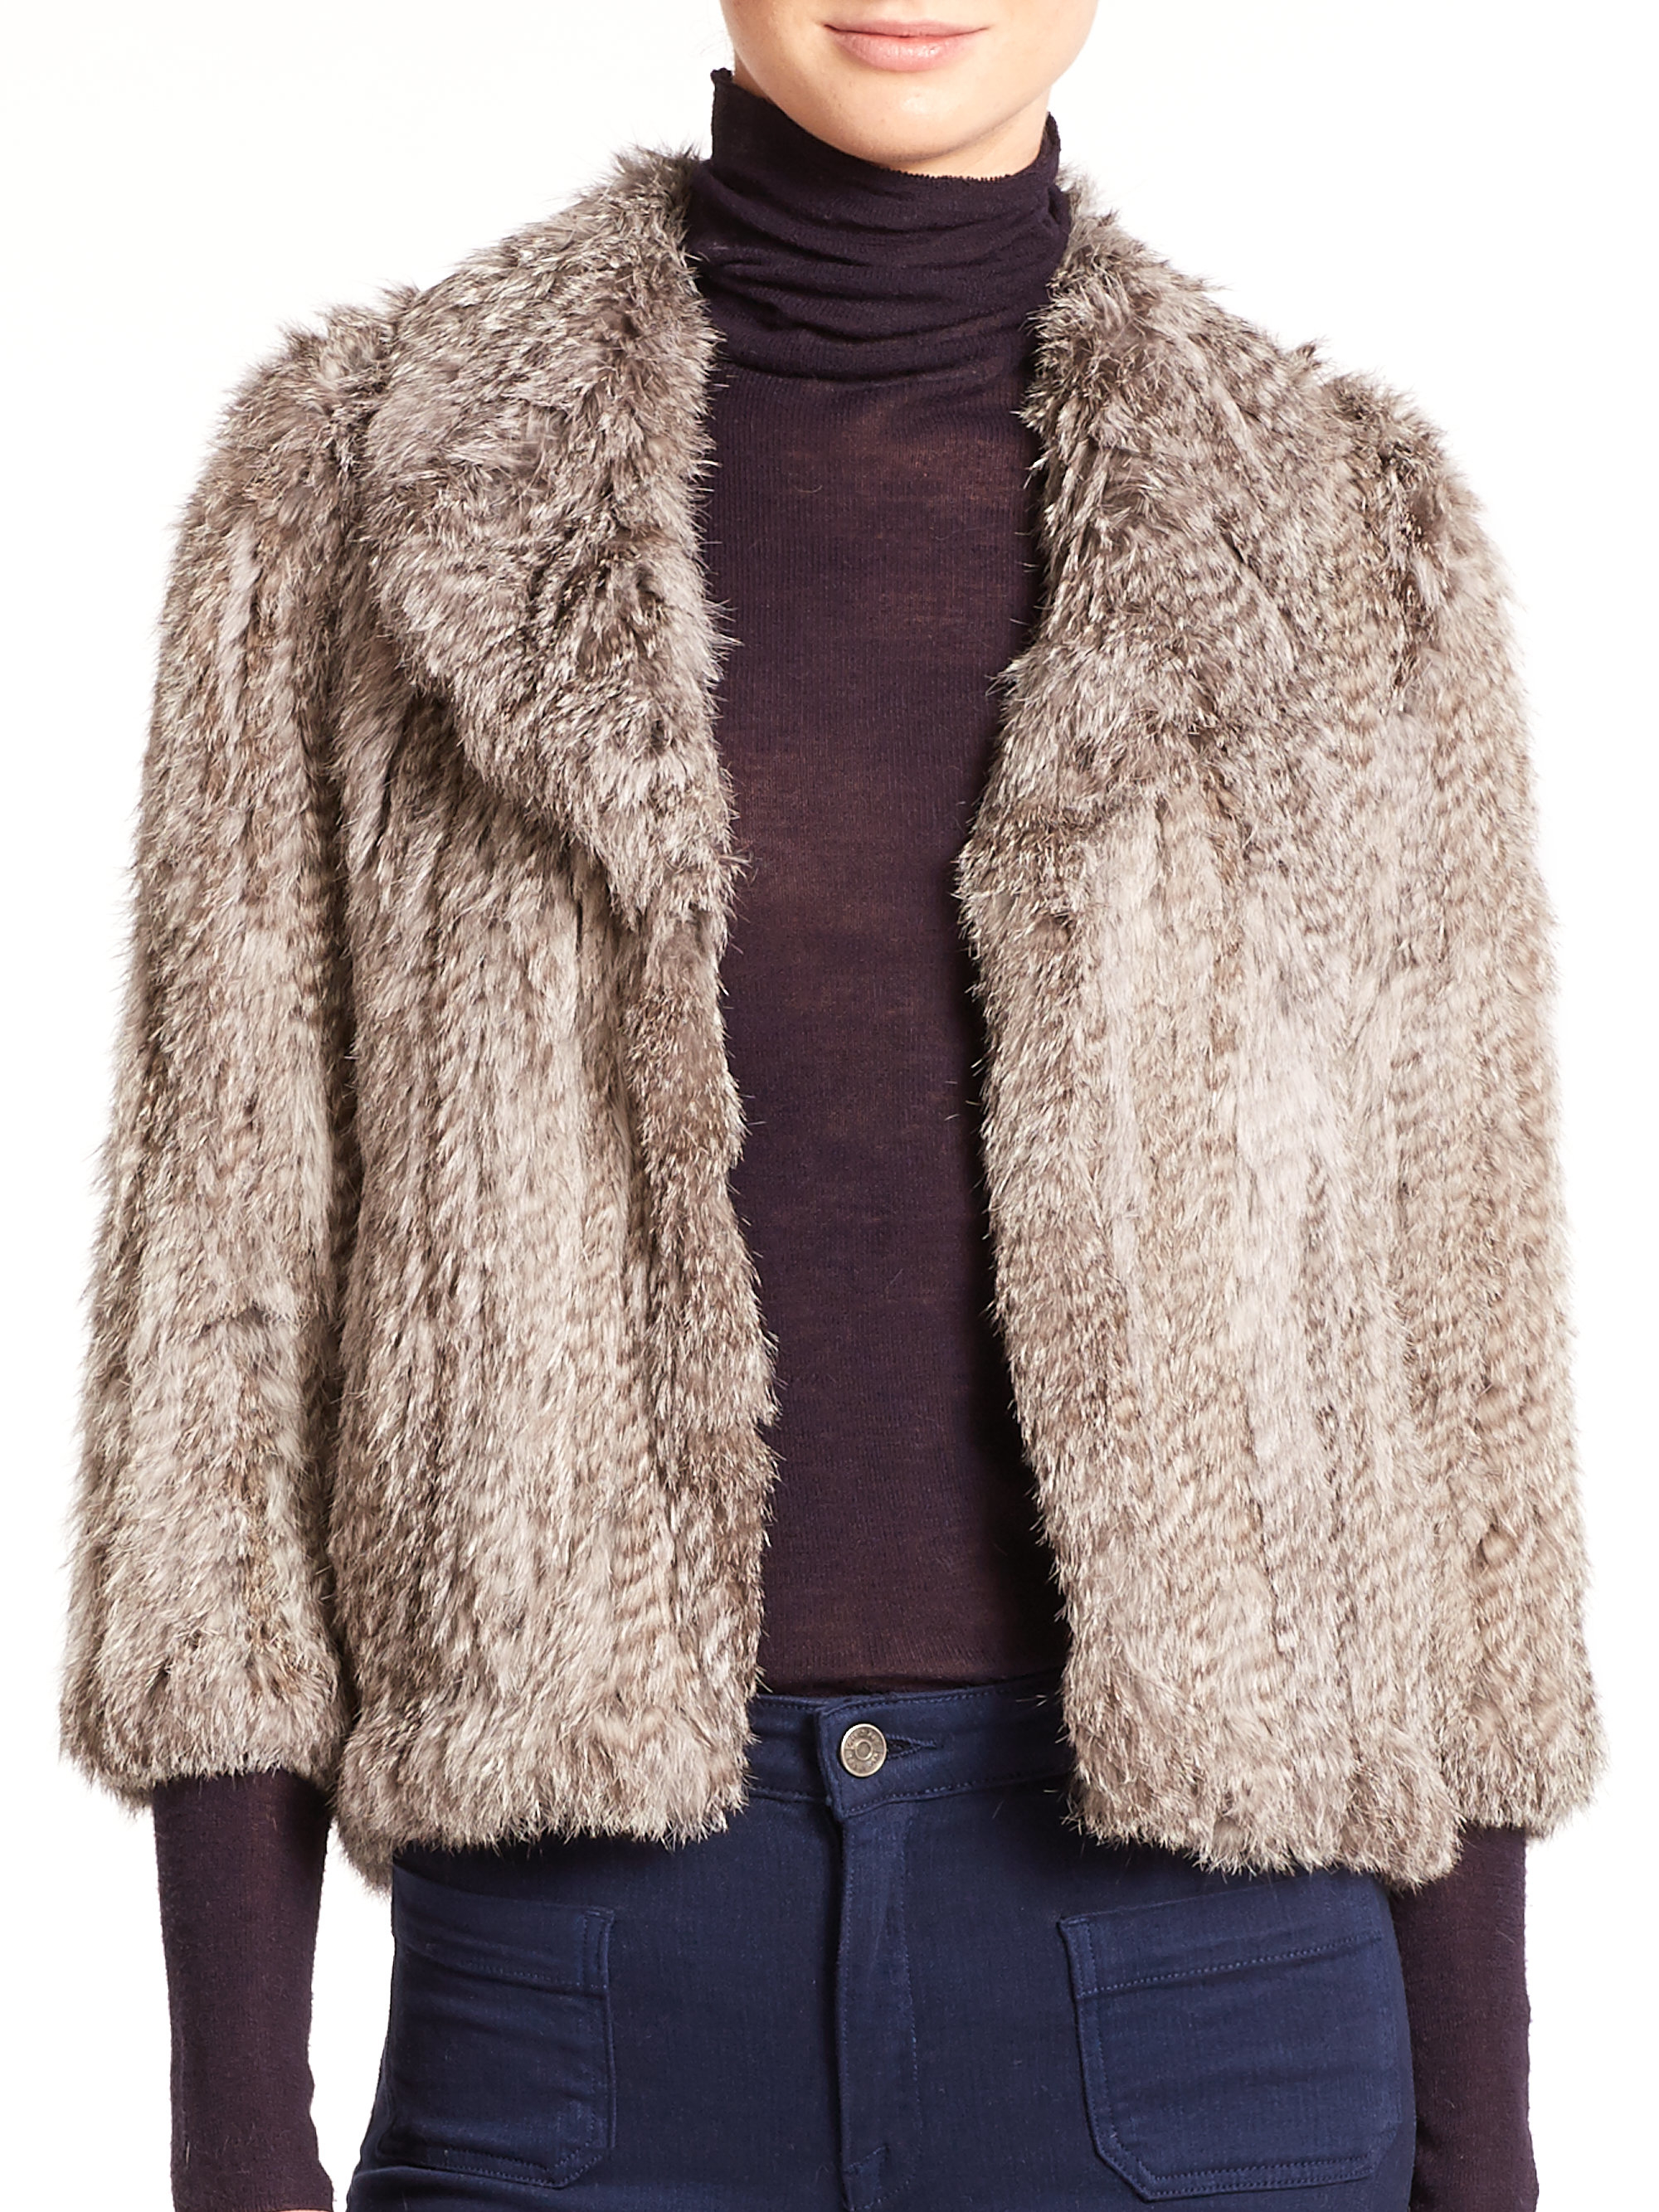 Joie Fayola Rabbit Fur Cape in Natural | Lyst